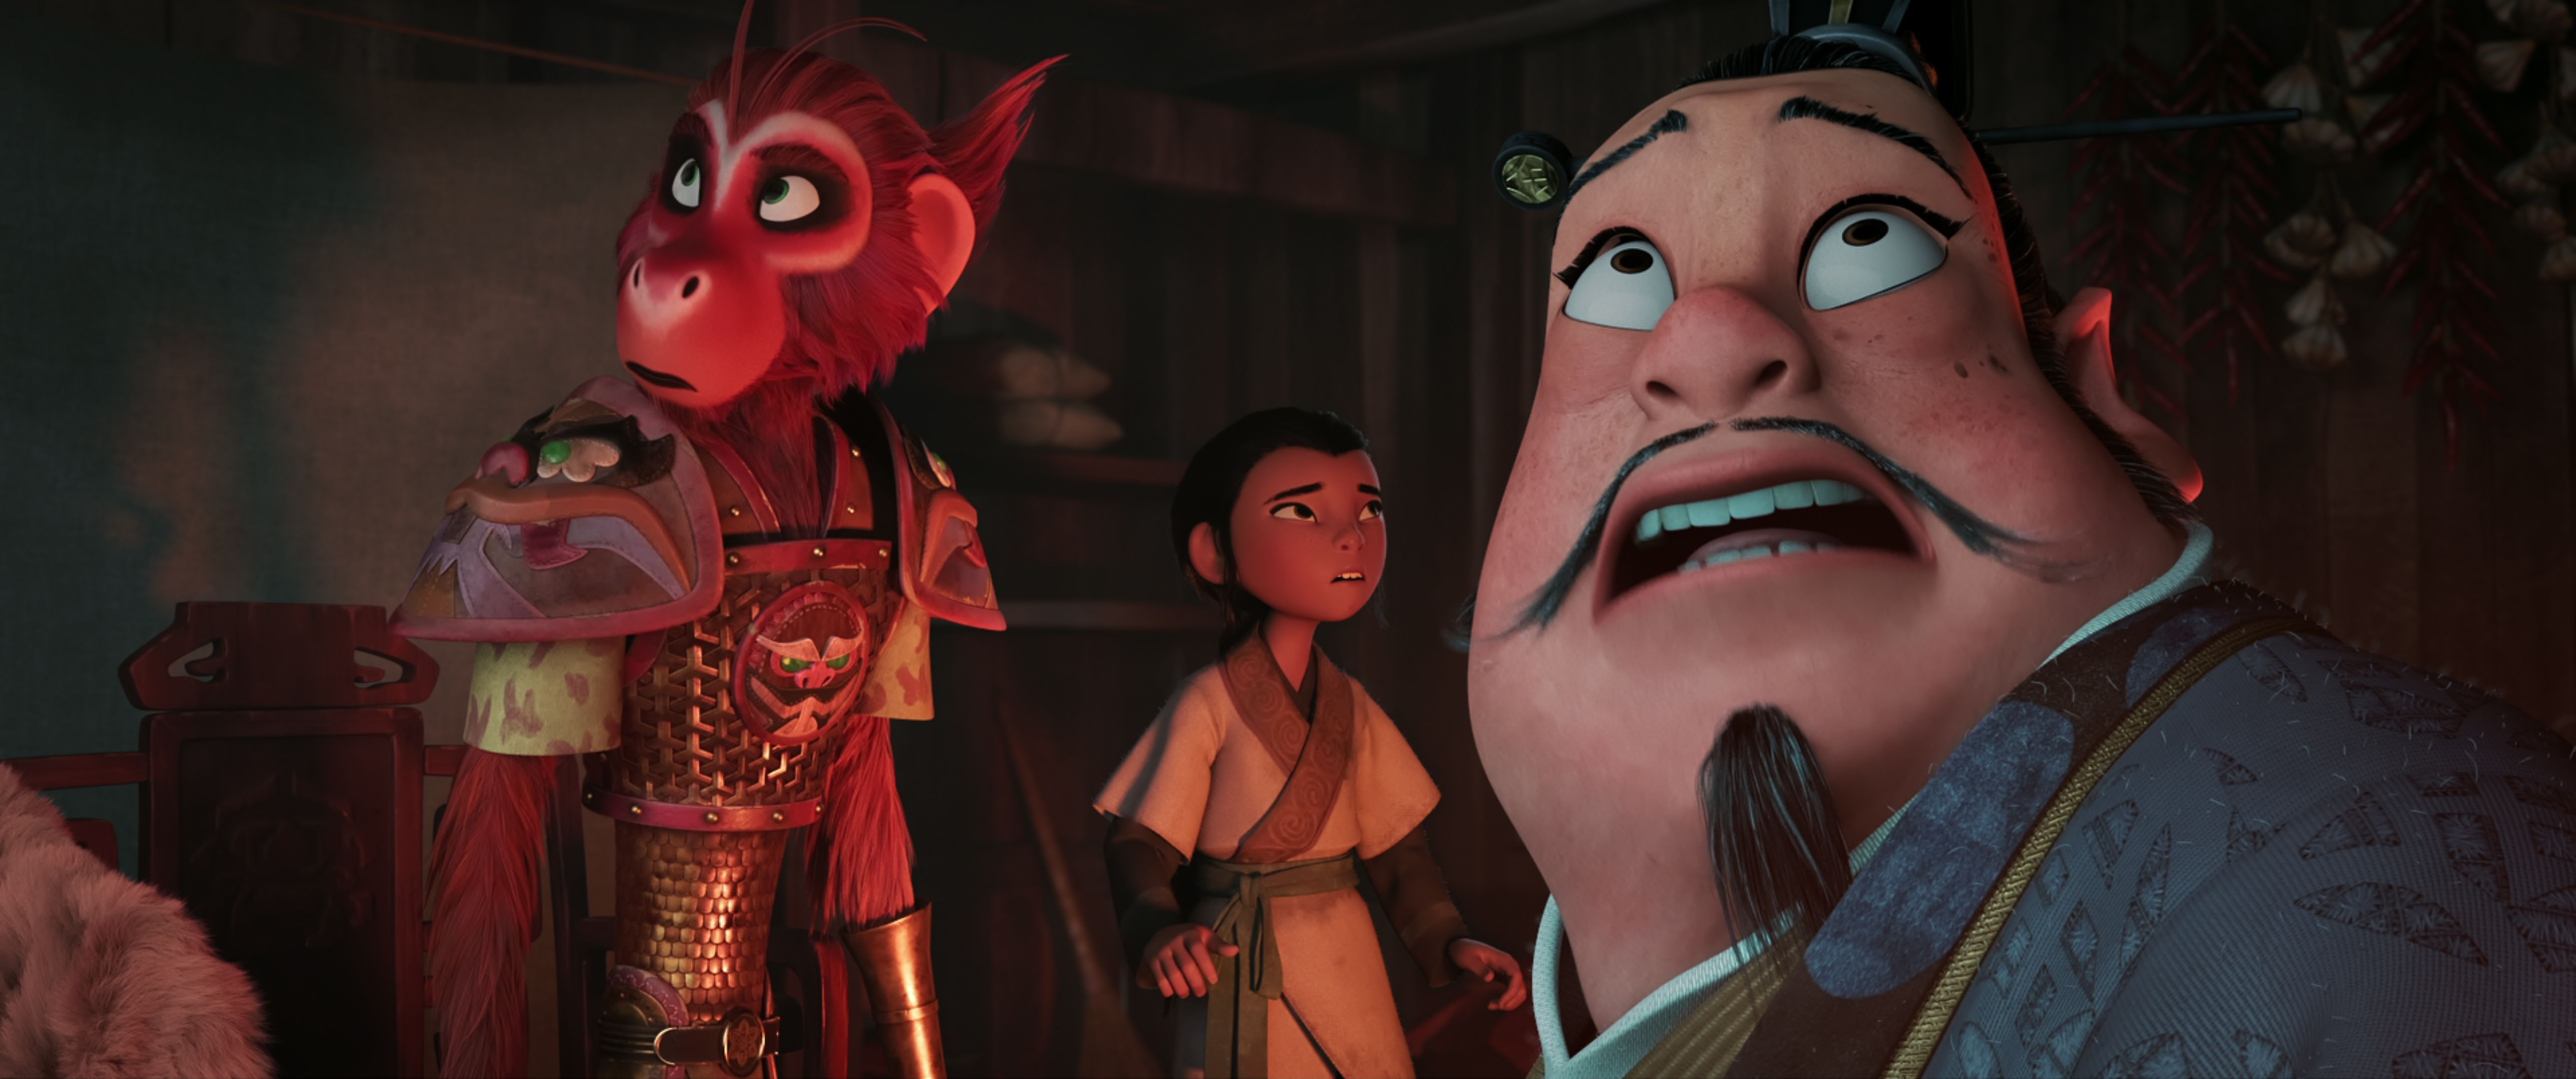 'The Monkey King' Trailer: A 500 Year Old Legend Flies High